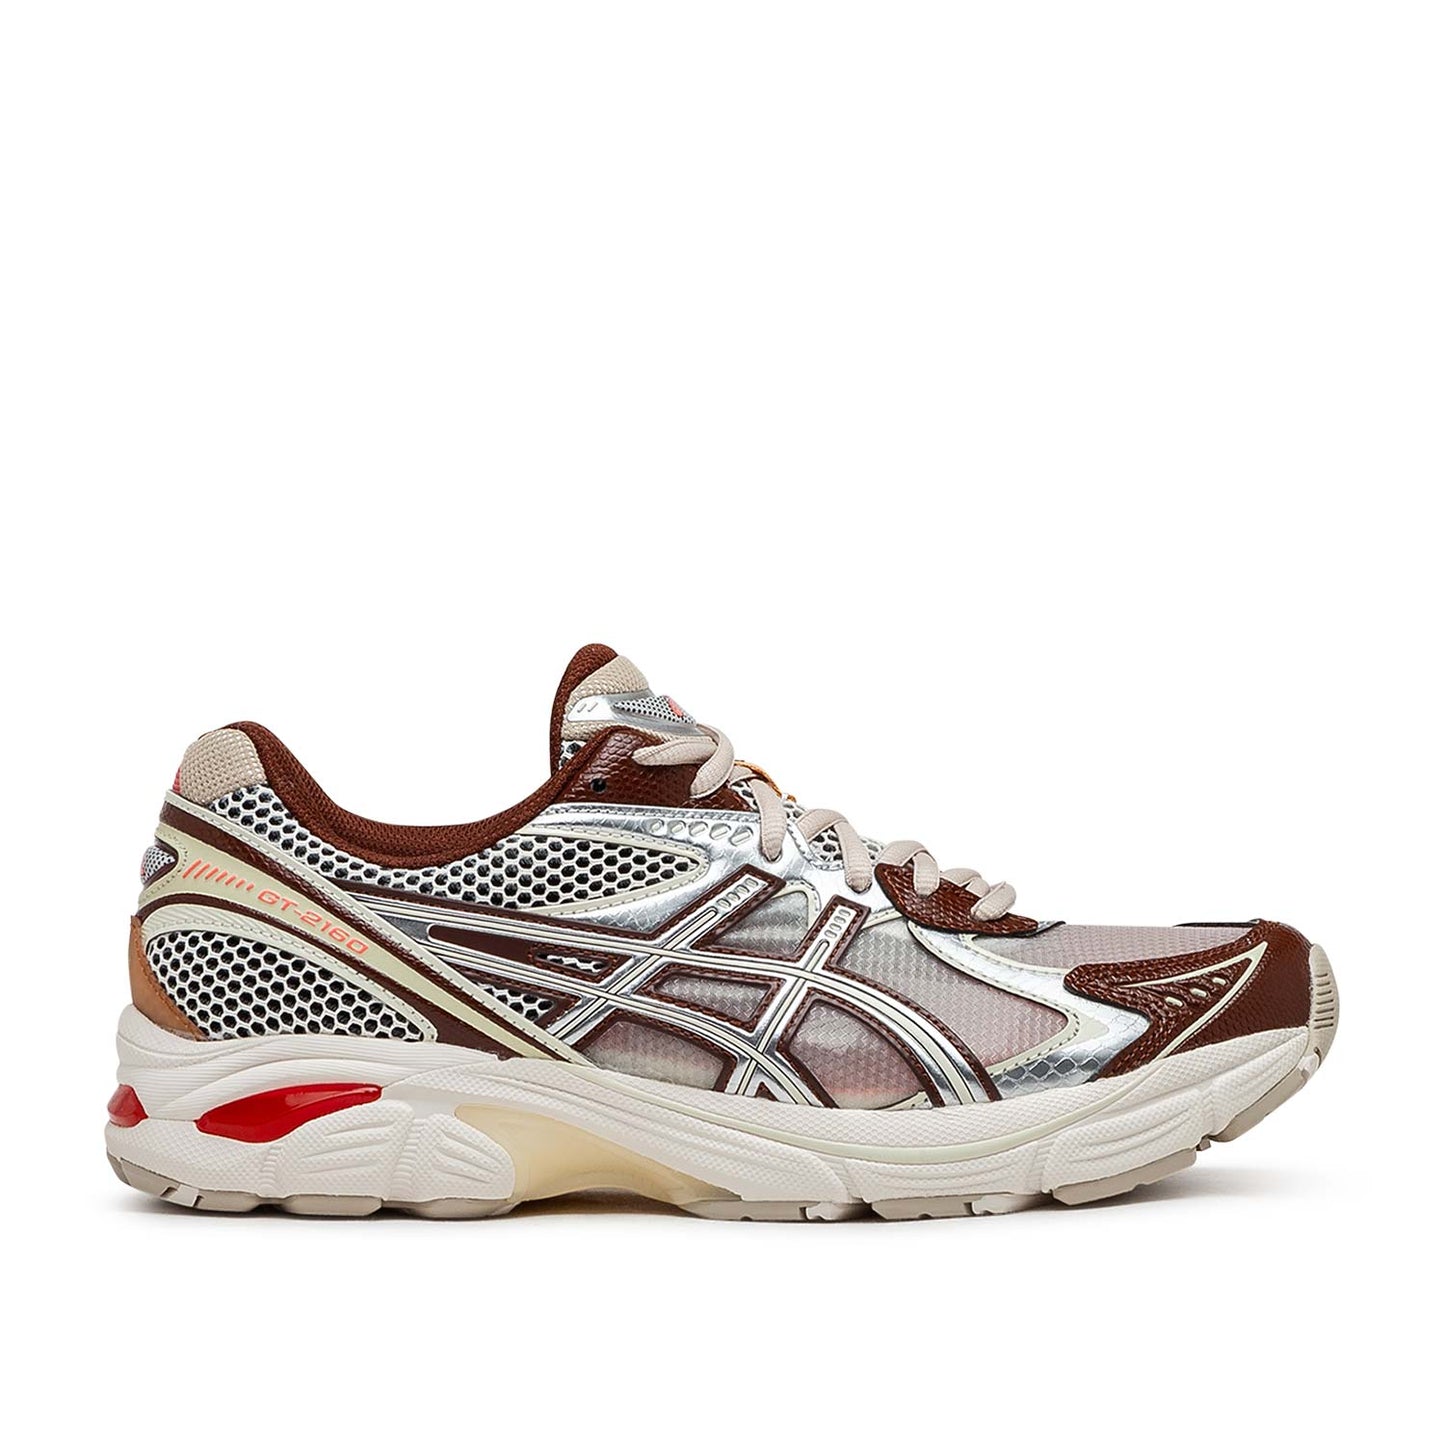 Asics x ABOVE THE CLOUDS  GT-2160 (Braun / Silber)  - Allike Store